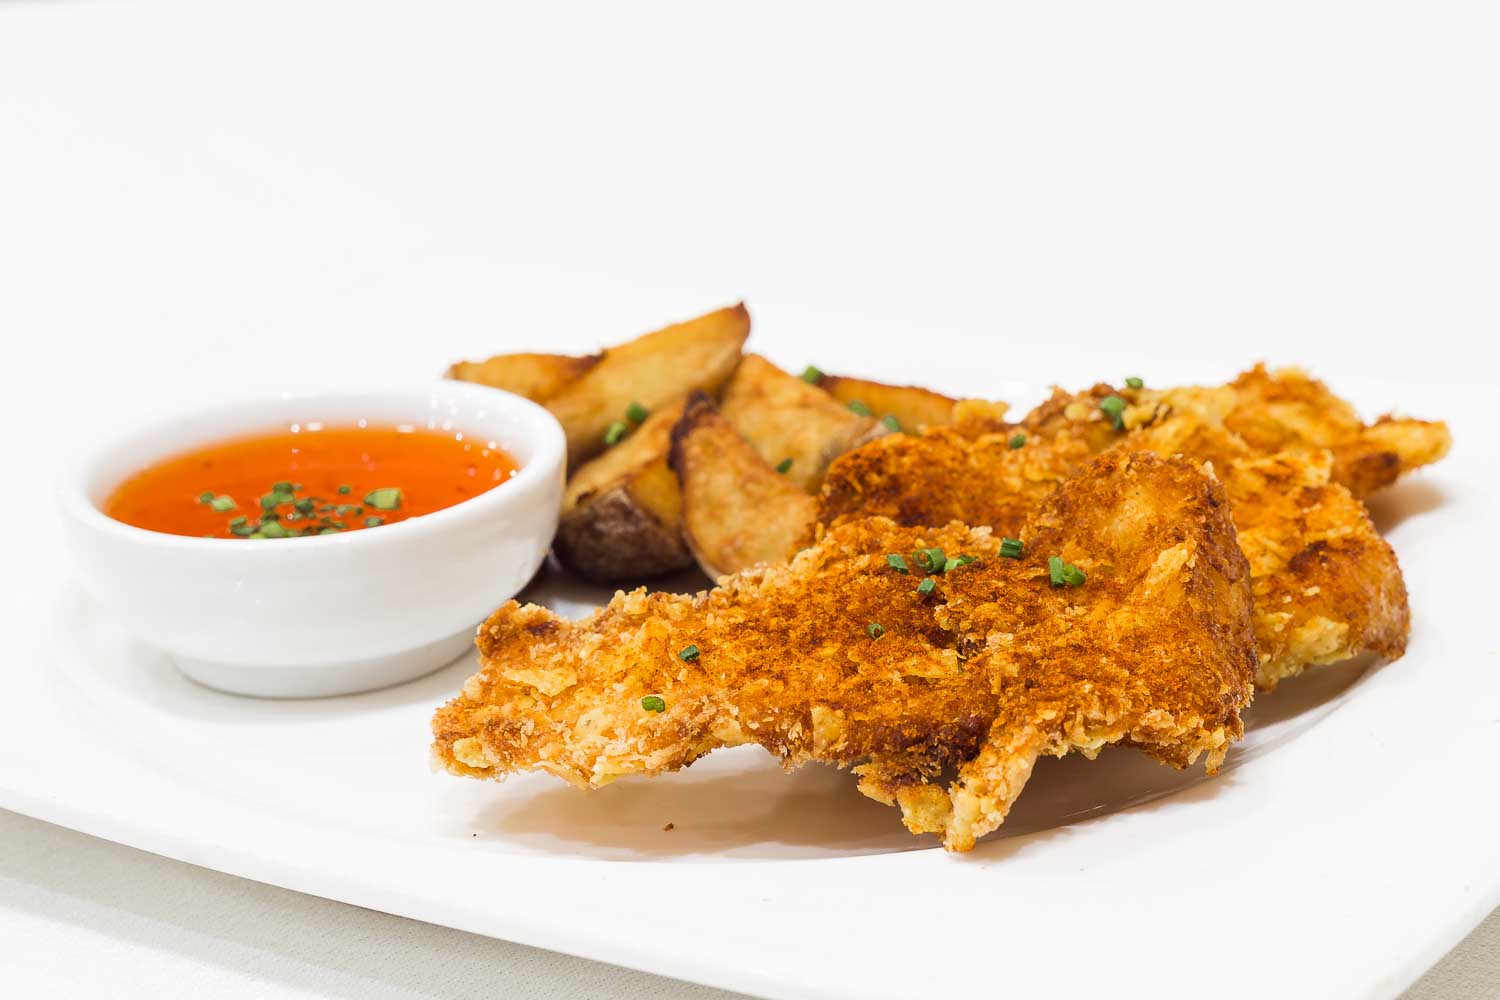 Fried chicken with spicy sauce